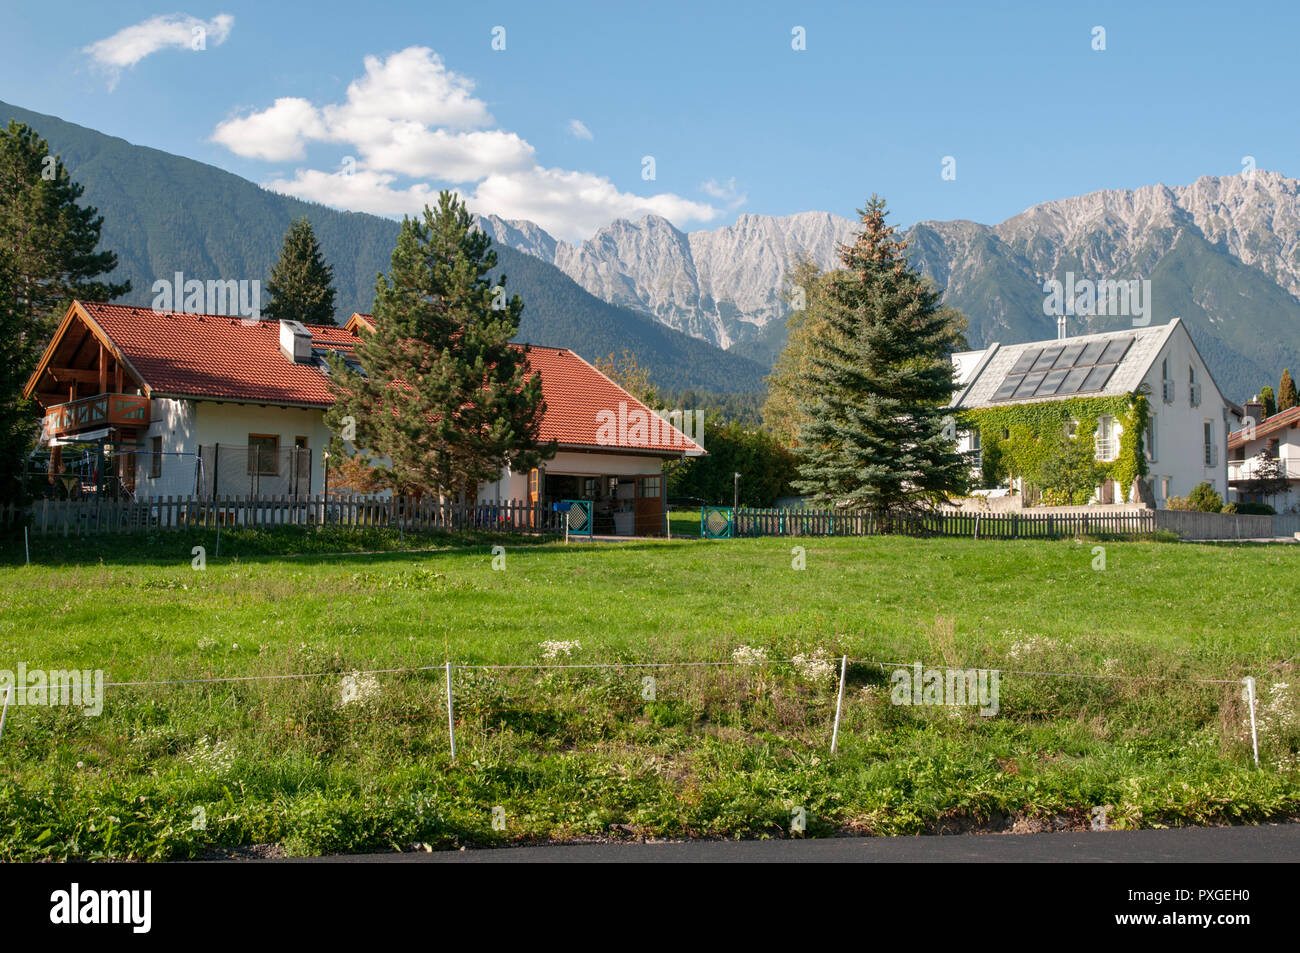 Imst is a town in the Austrian federal state of Tyrol. It lies on the River Inn in western Tyrol, Stock Photo